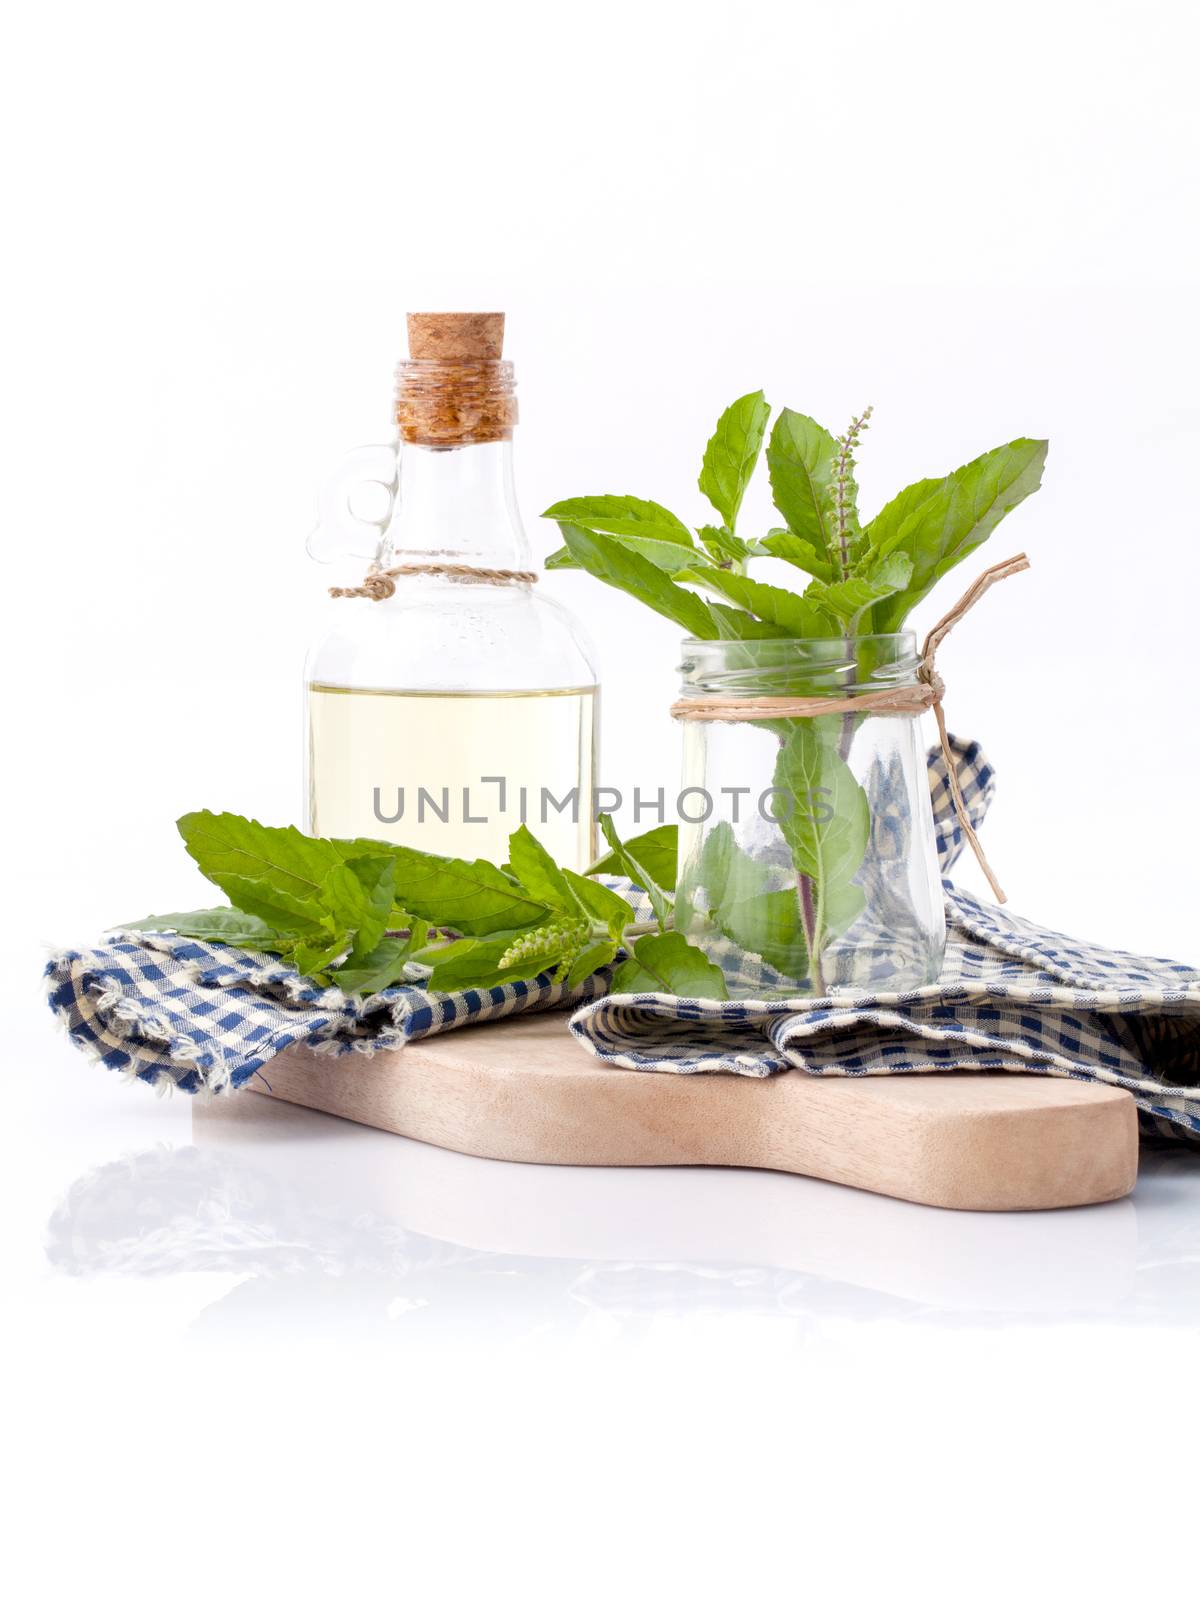 Branch of fresh holy basil in bowl on cutting board isolate on white background.